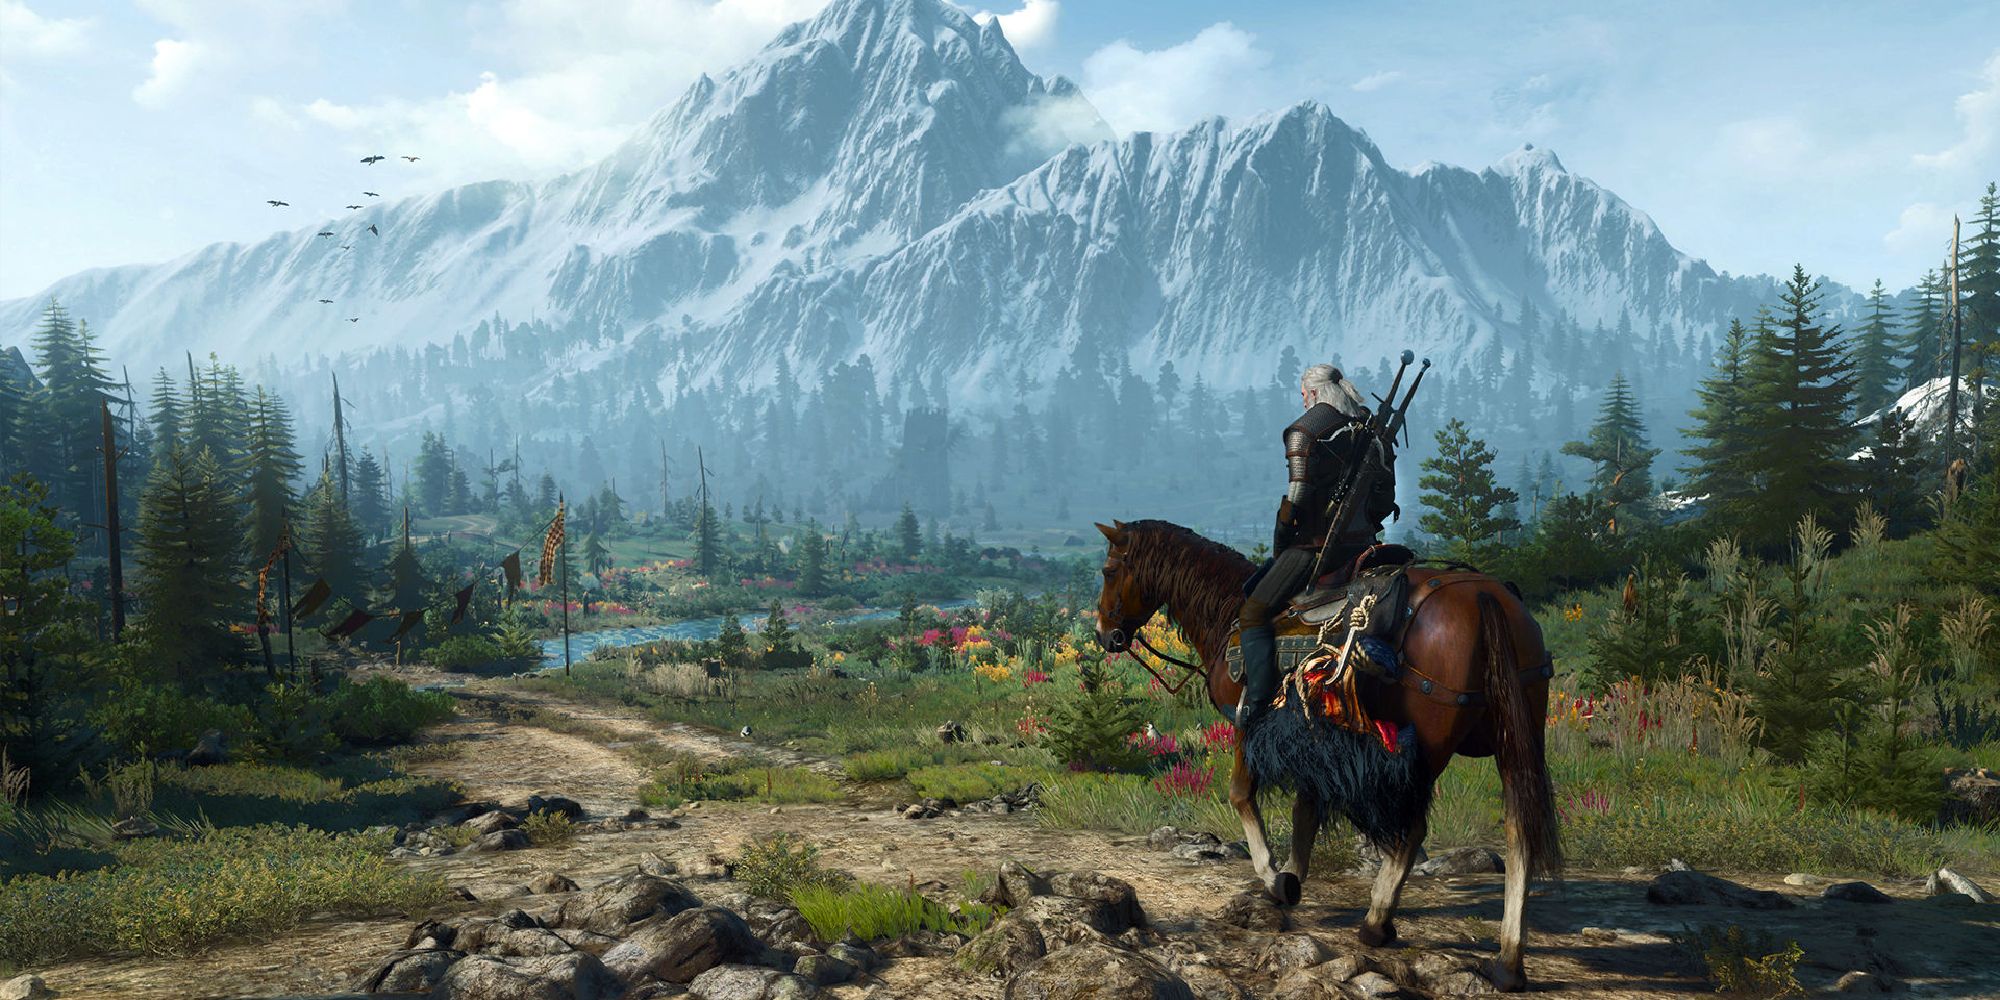 Geralt sat on Roach as he overlooks a beautiful expanse of trees, fields, ponds and distant mountains in The Witcher 3: Wild Hunt 